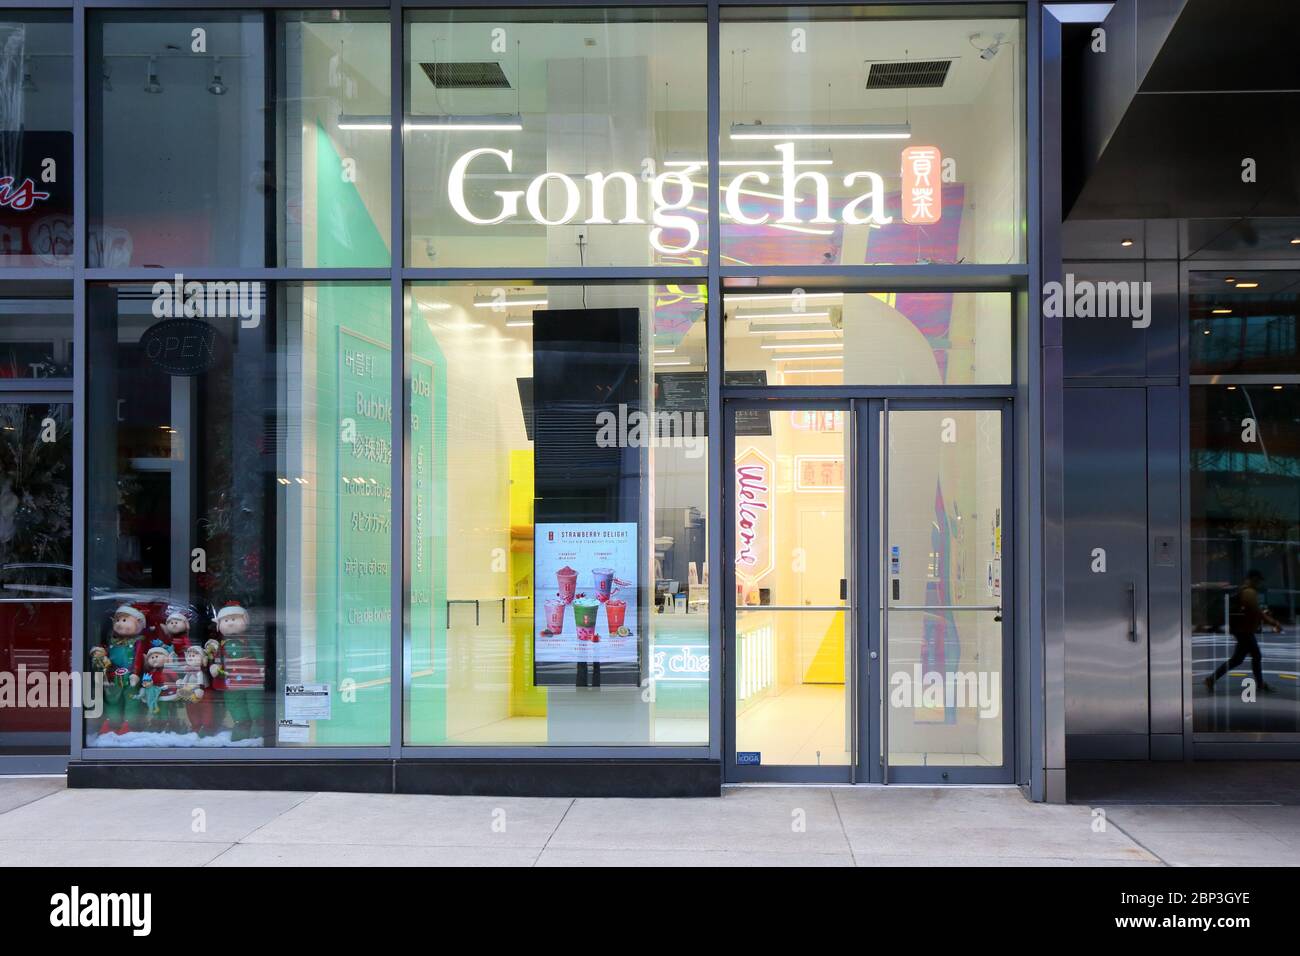 Gong Cha 貢茶, 1600 Broadway, New York, New York, NYC Storefront Foto eines Bubble Tea Shop Franchise am Times Square in Manhattan. Stockfoto